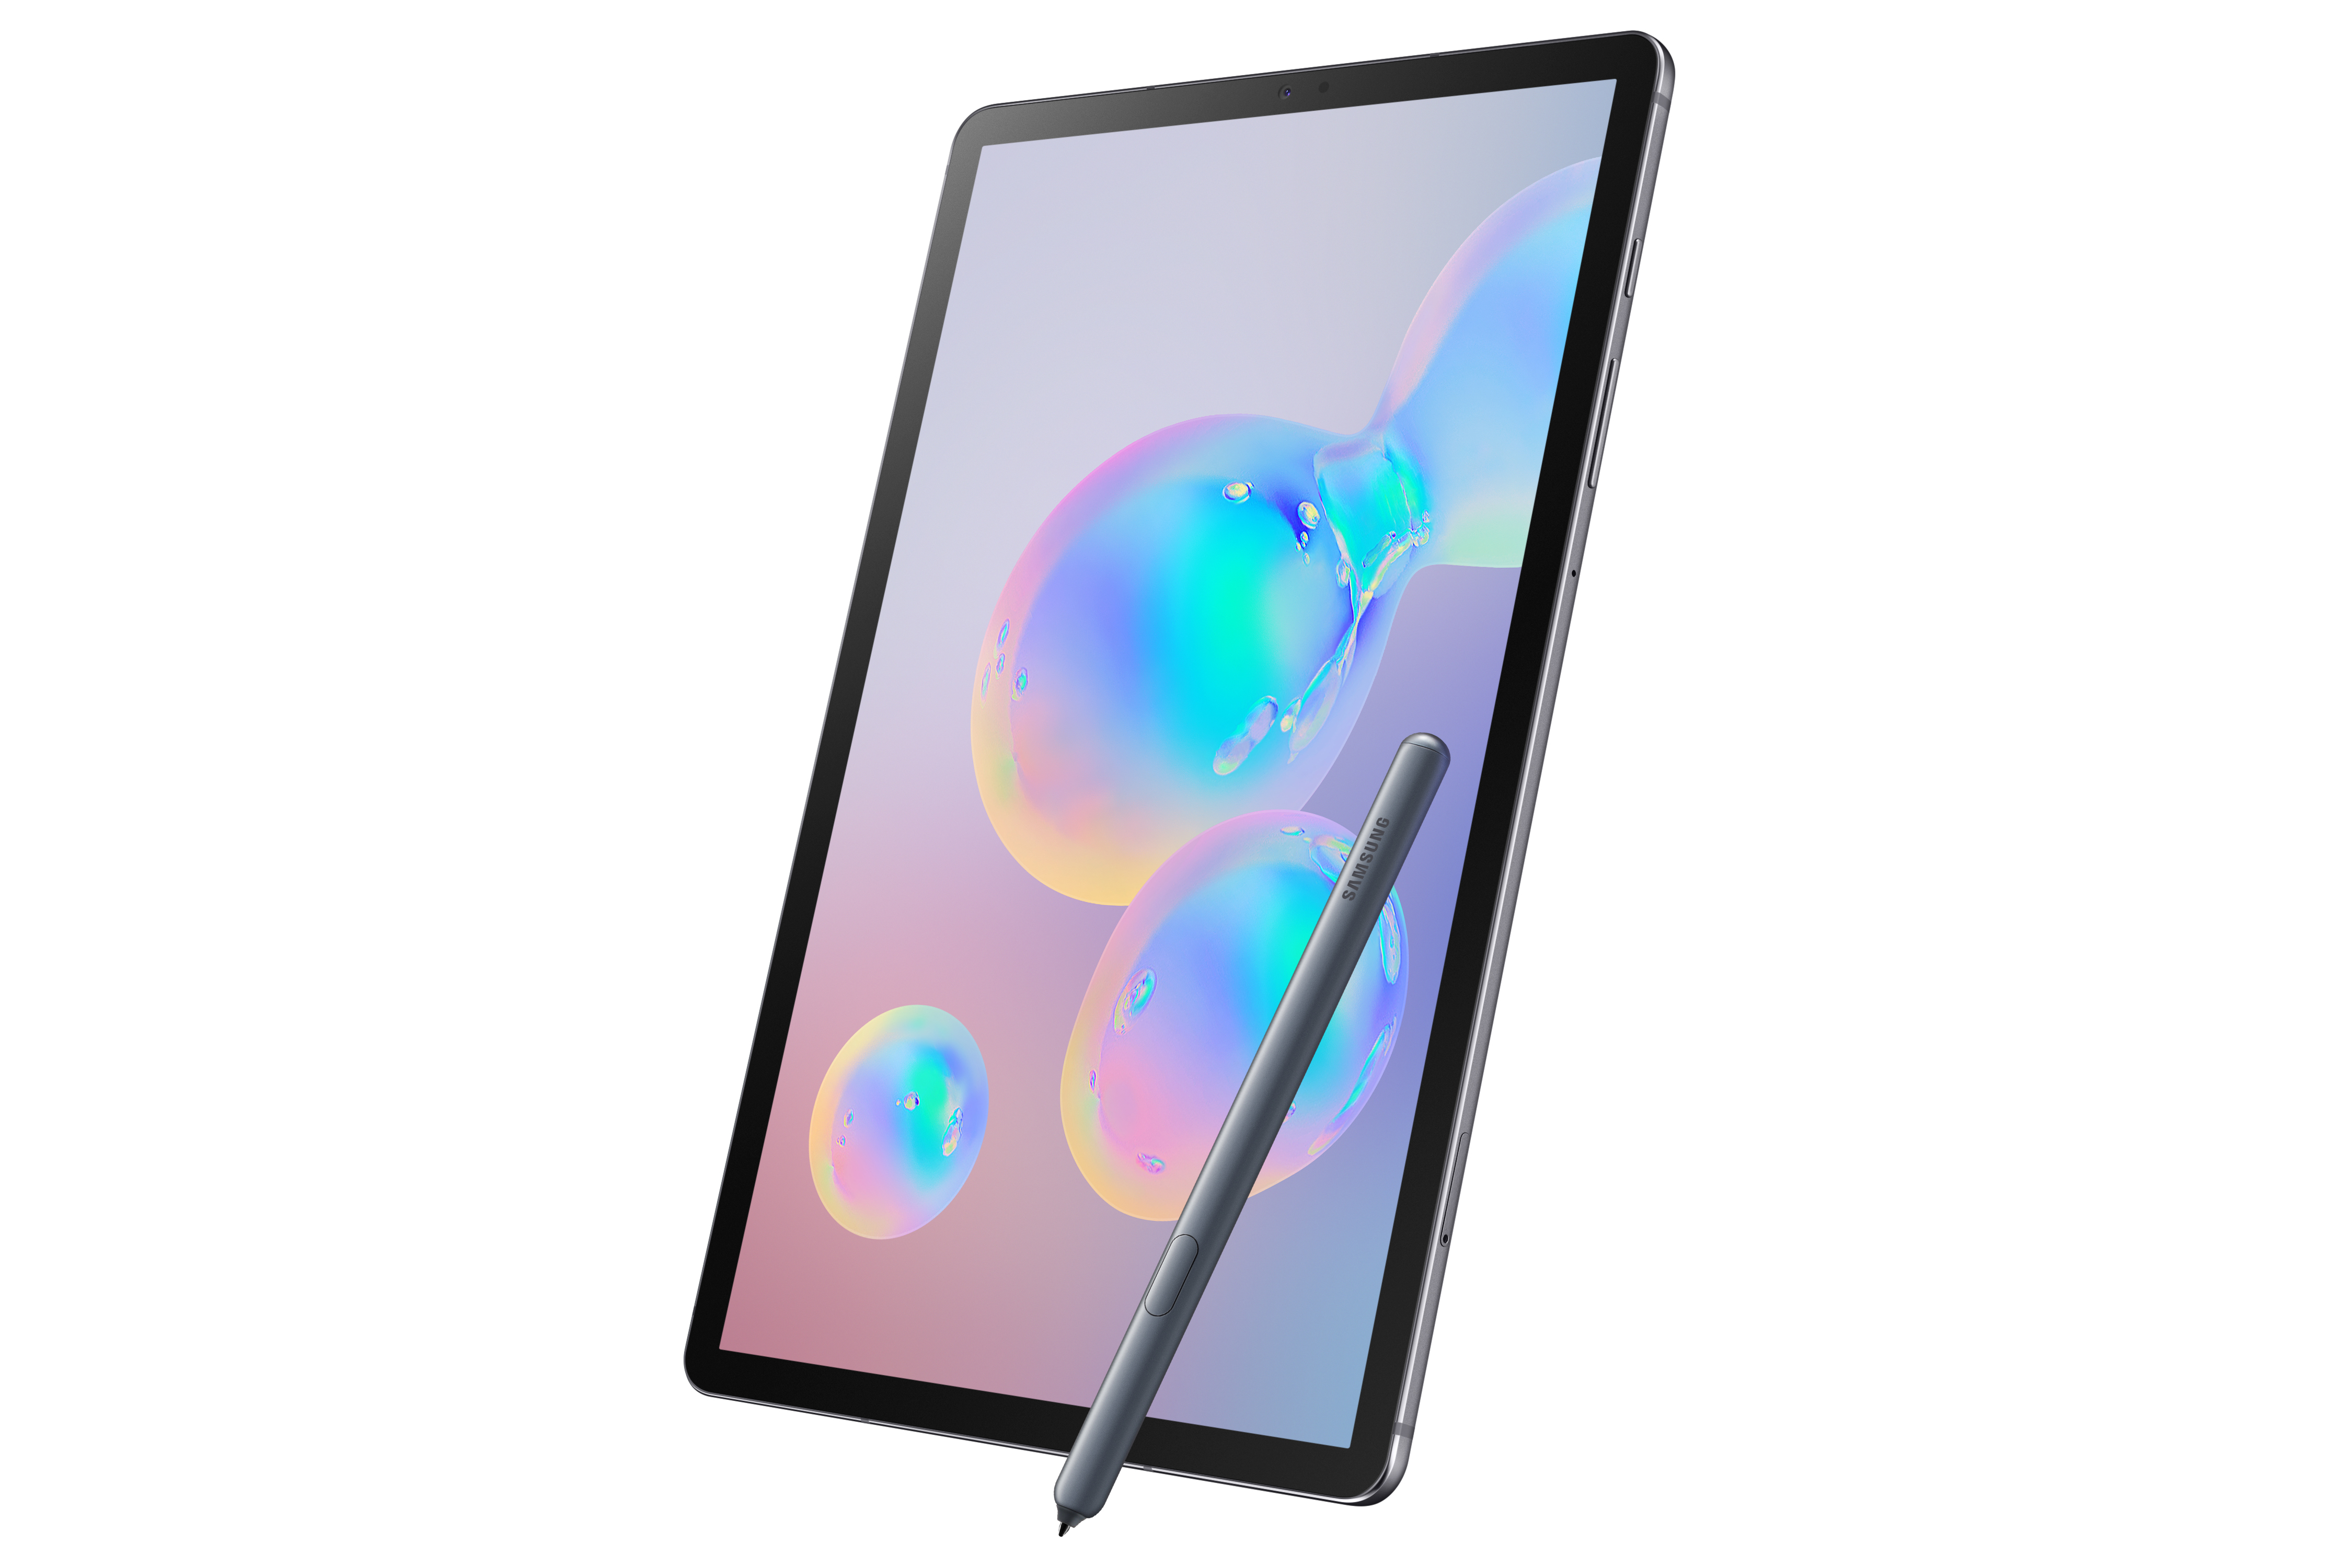 Galaxy Tab S6: Samsung's new tablet flagship for the first time with a